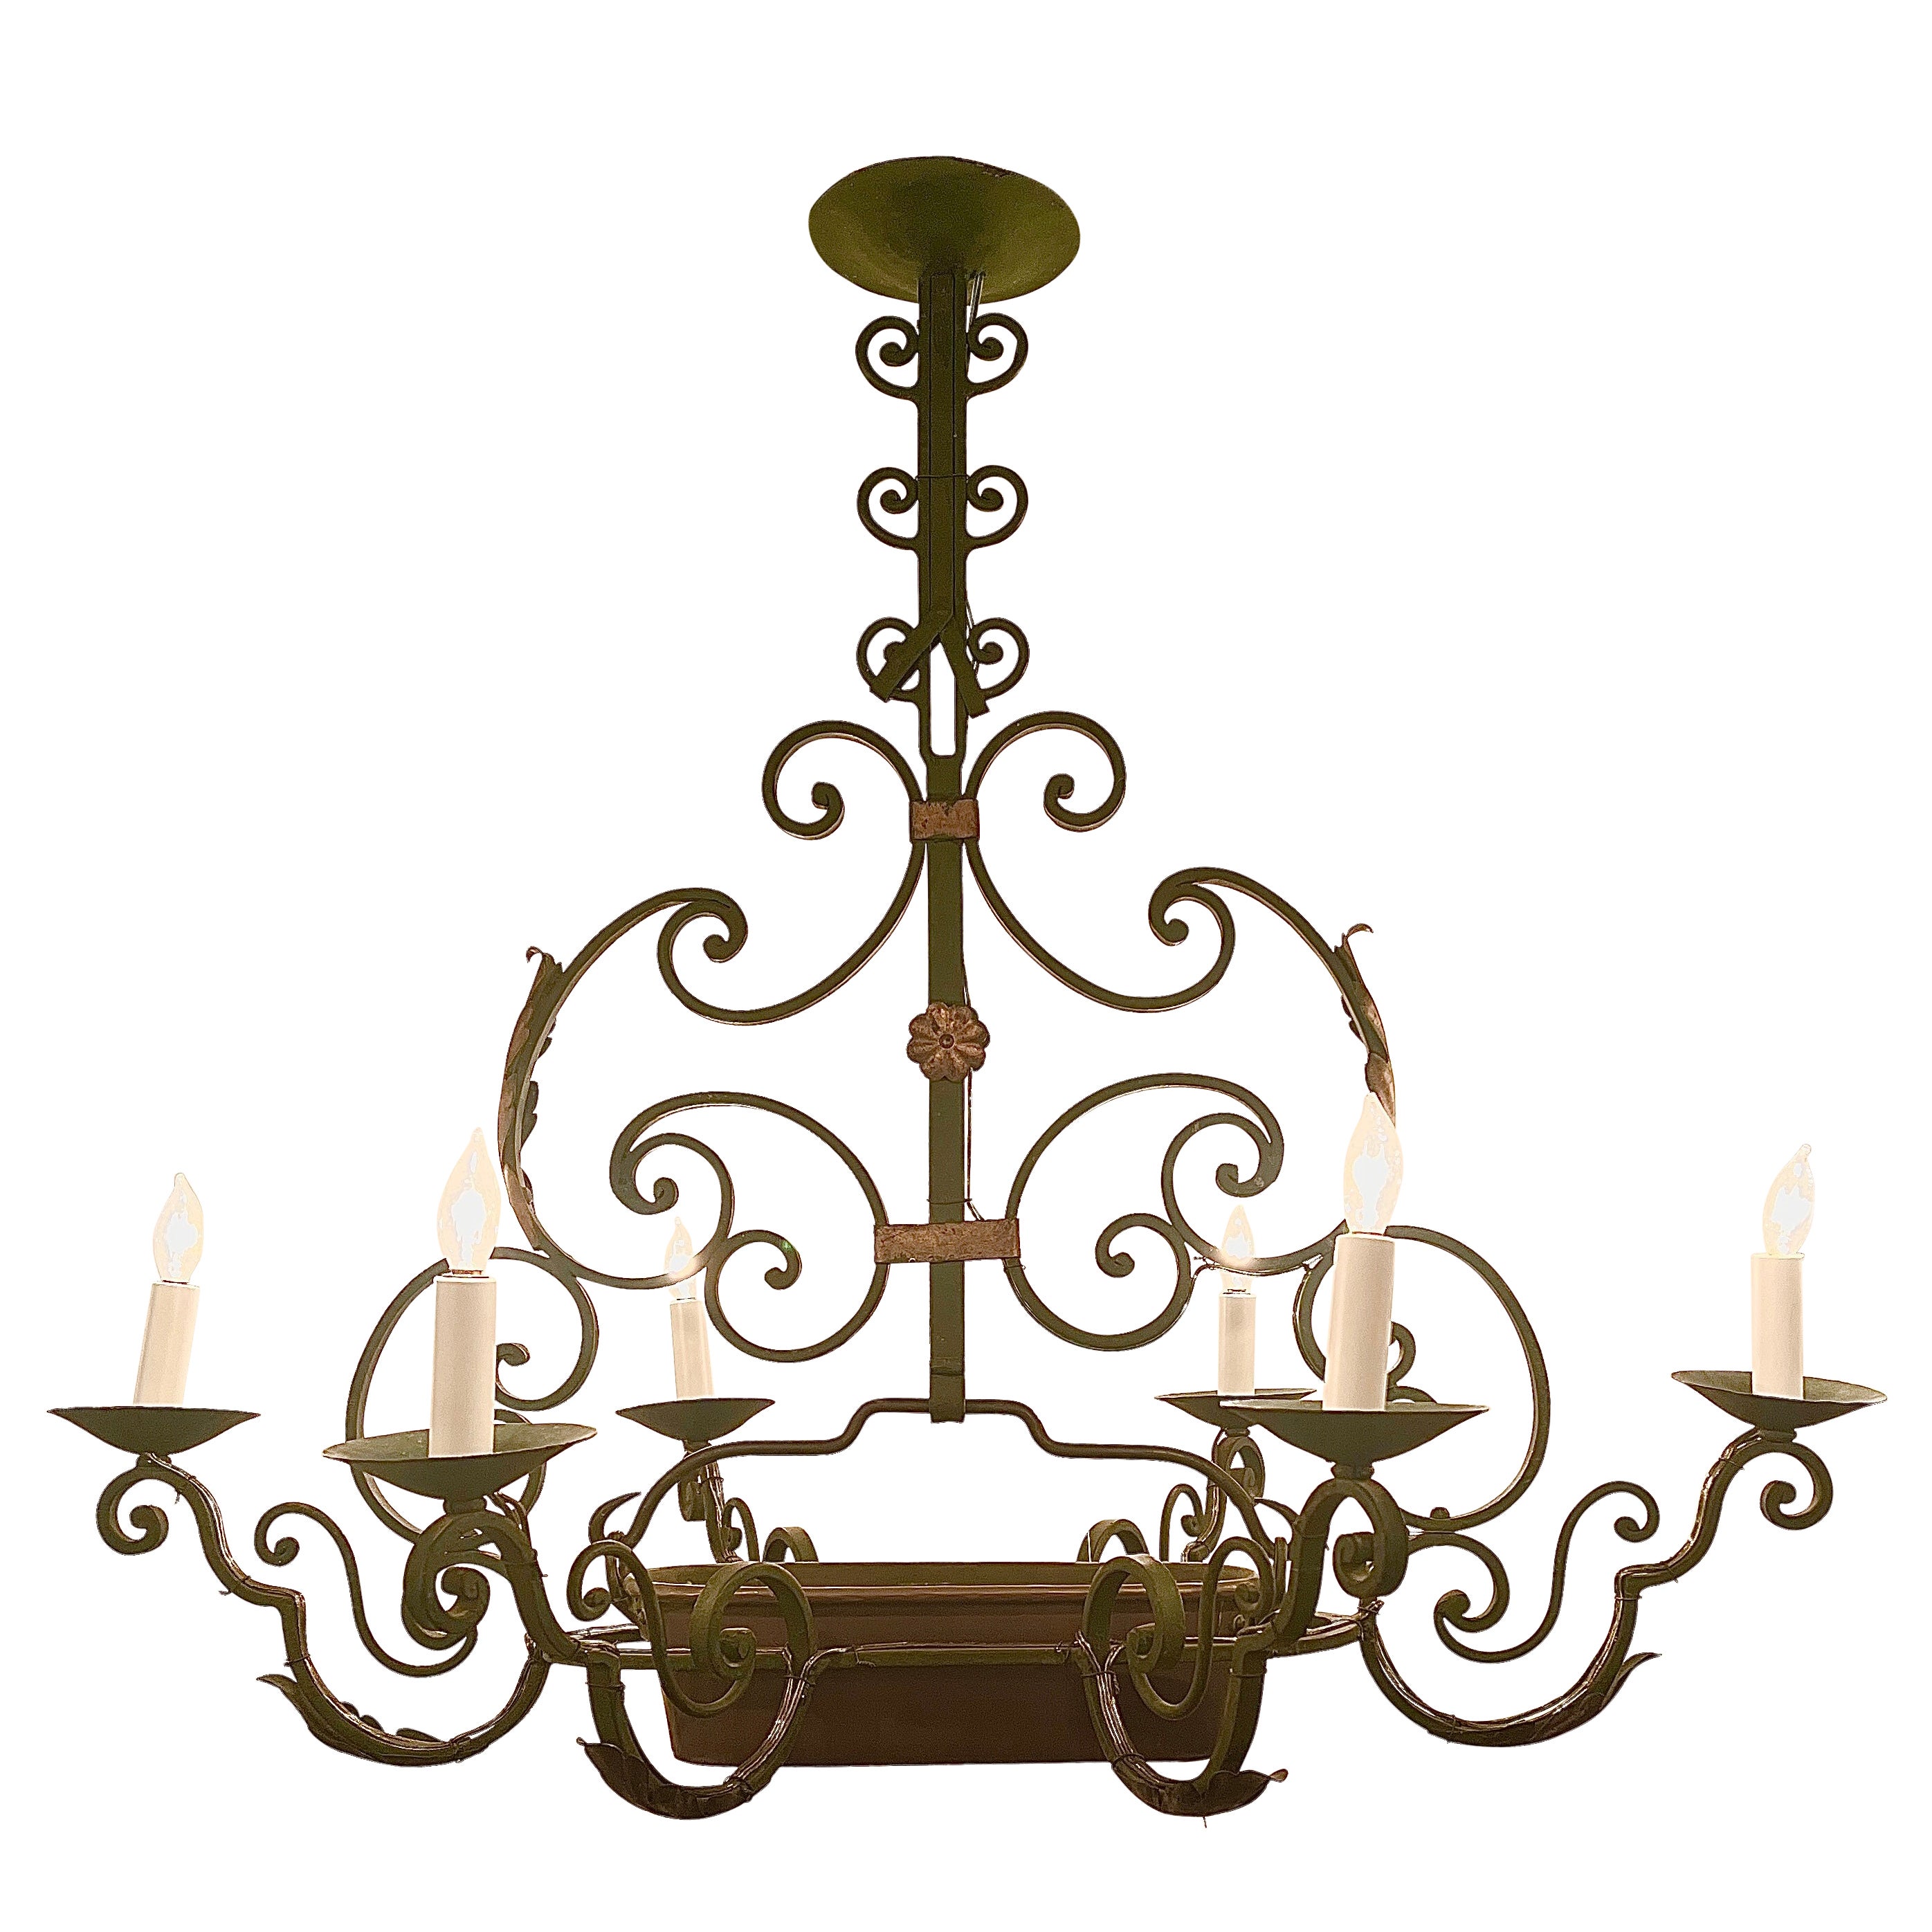 Antique French Iron and Copper Fish Poacher Chandelier, Circa 1880-1890. For Sale